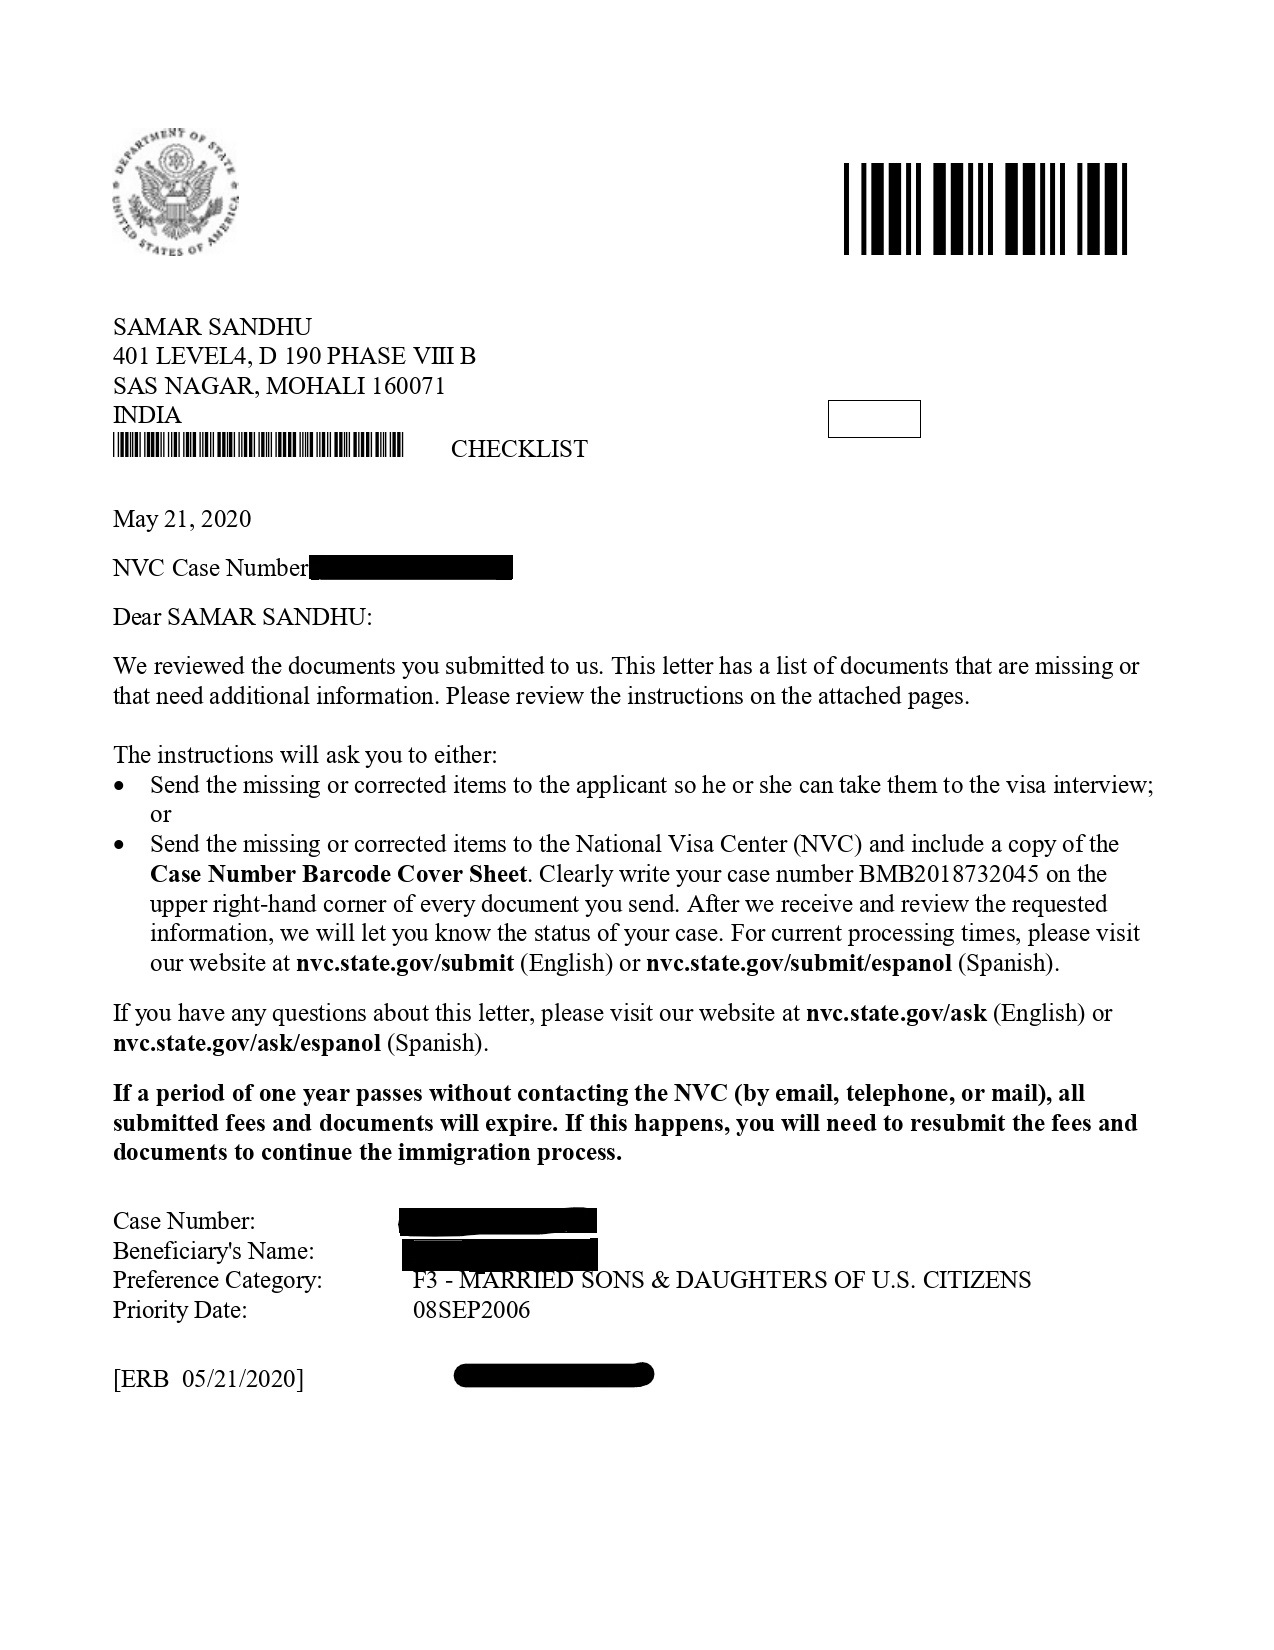 Welcome Letter From NVC For Immigrant Visa Processing